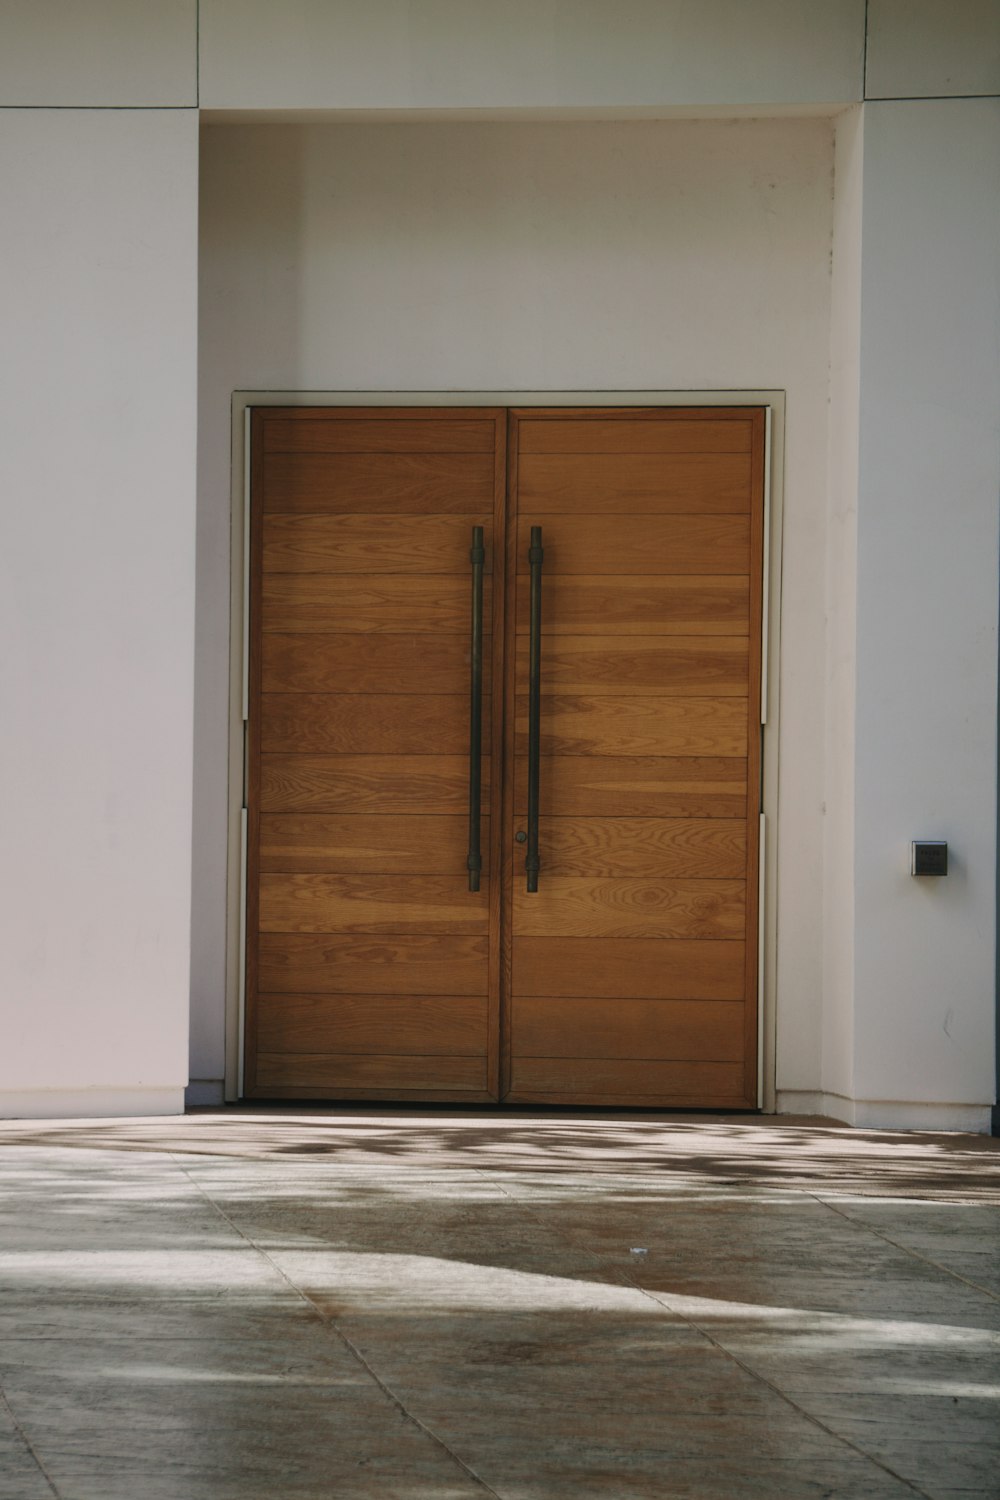 a pair of wooden doors in front of a white building